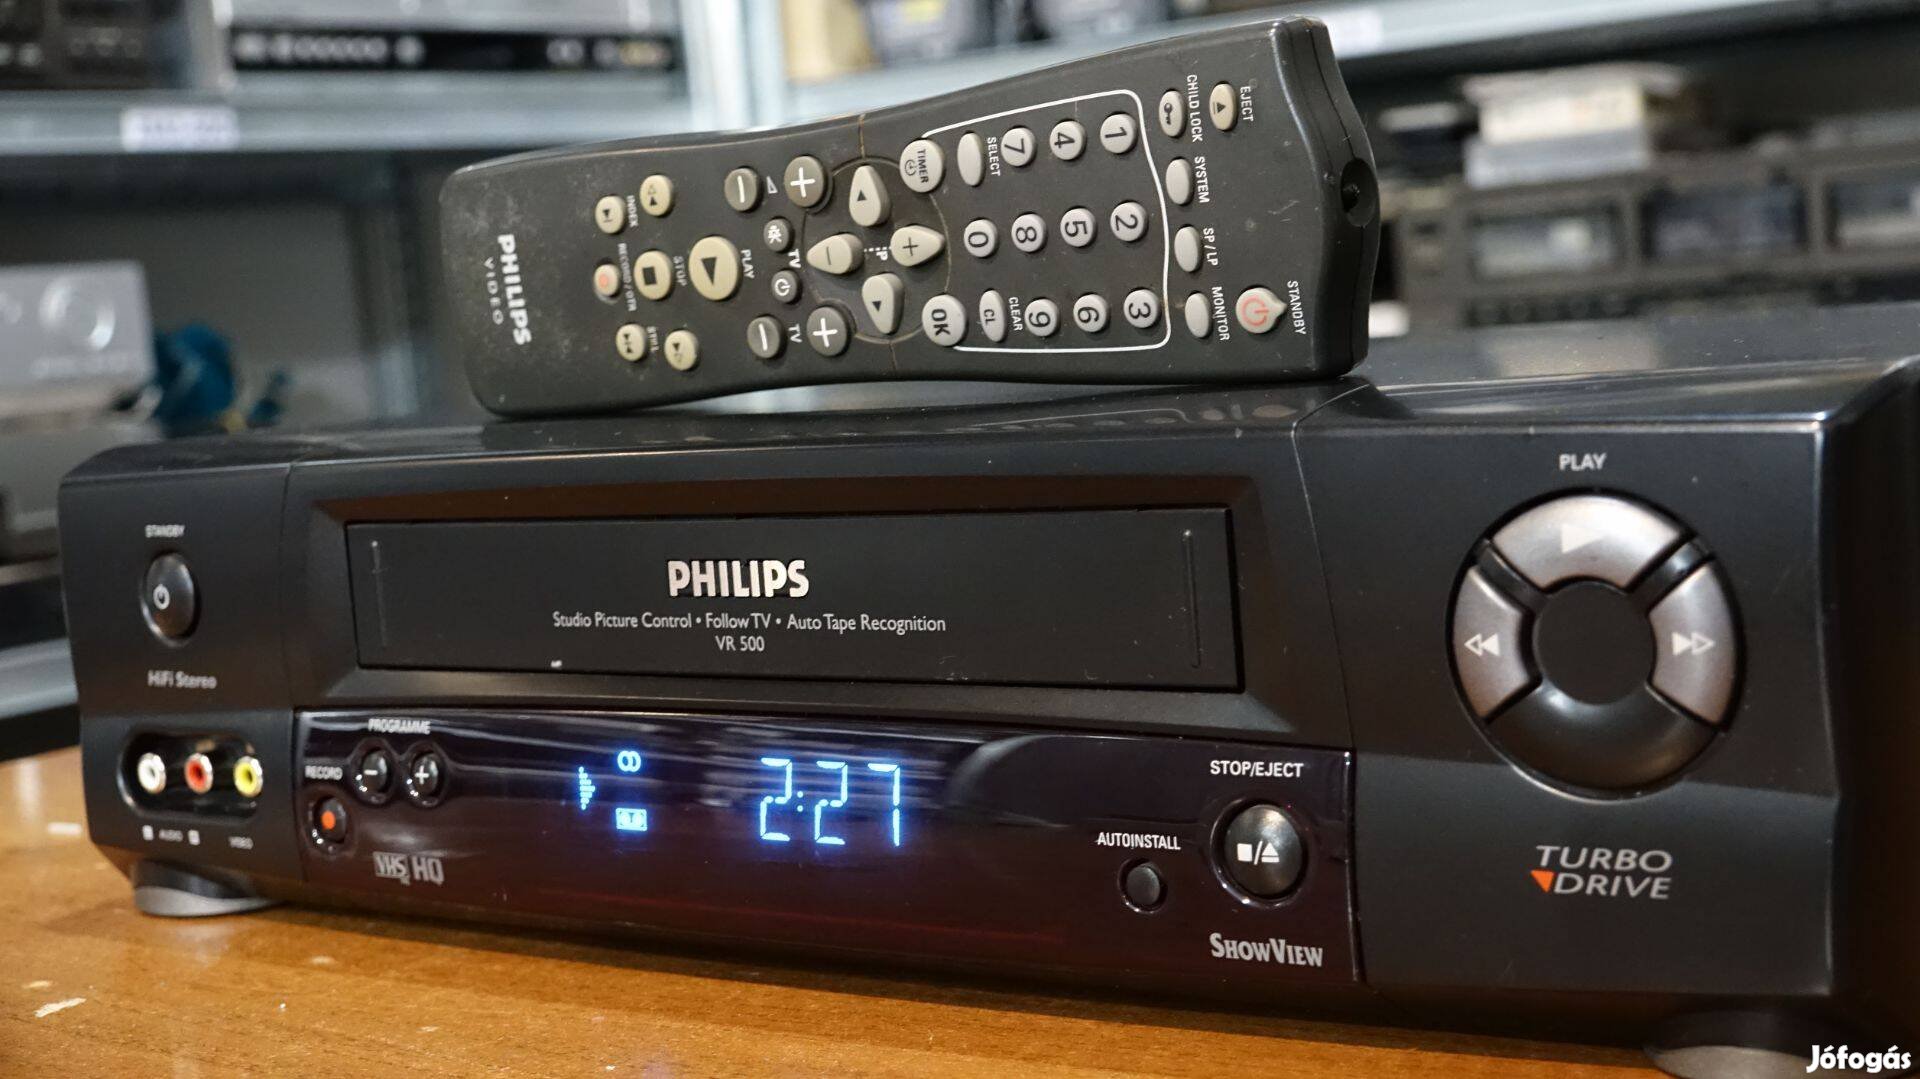 Philips VR500 VHS Recorder